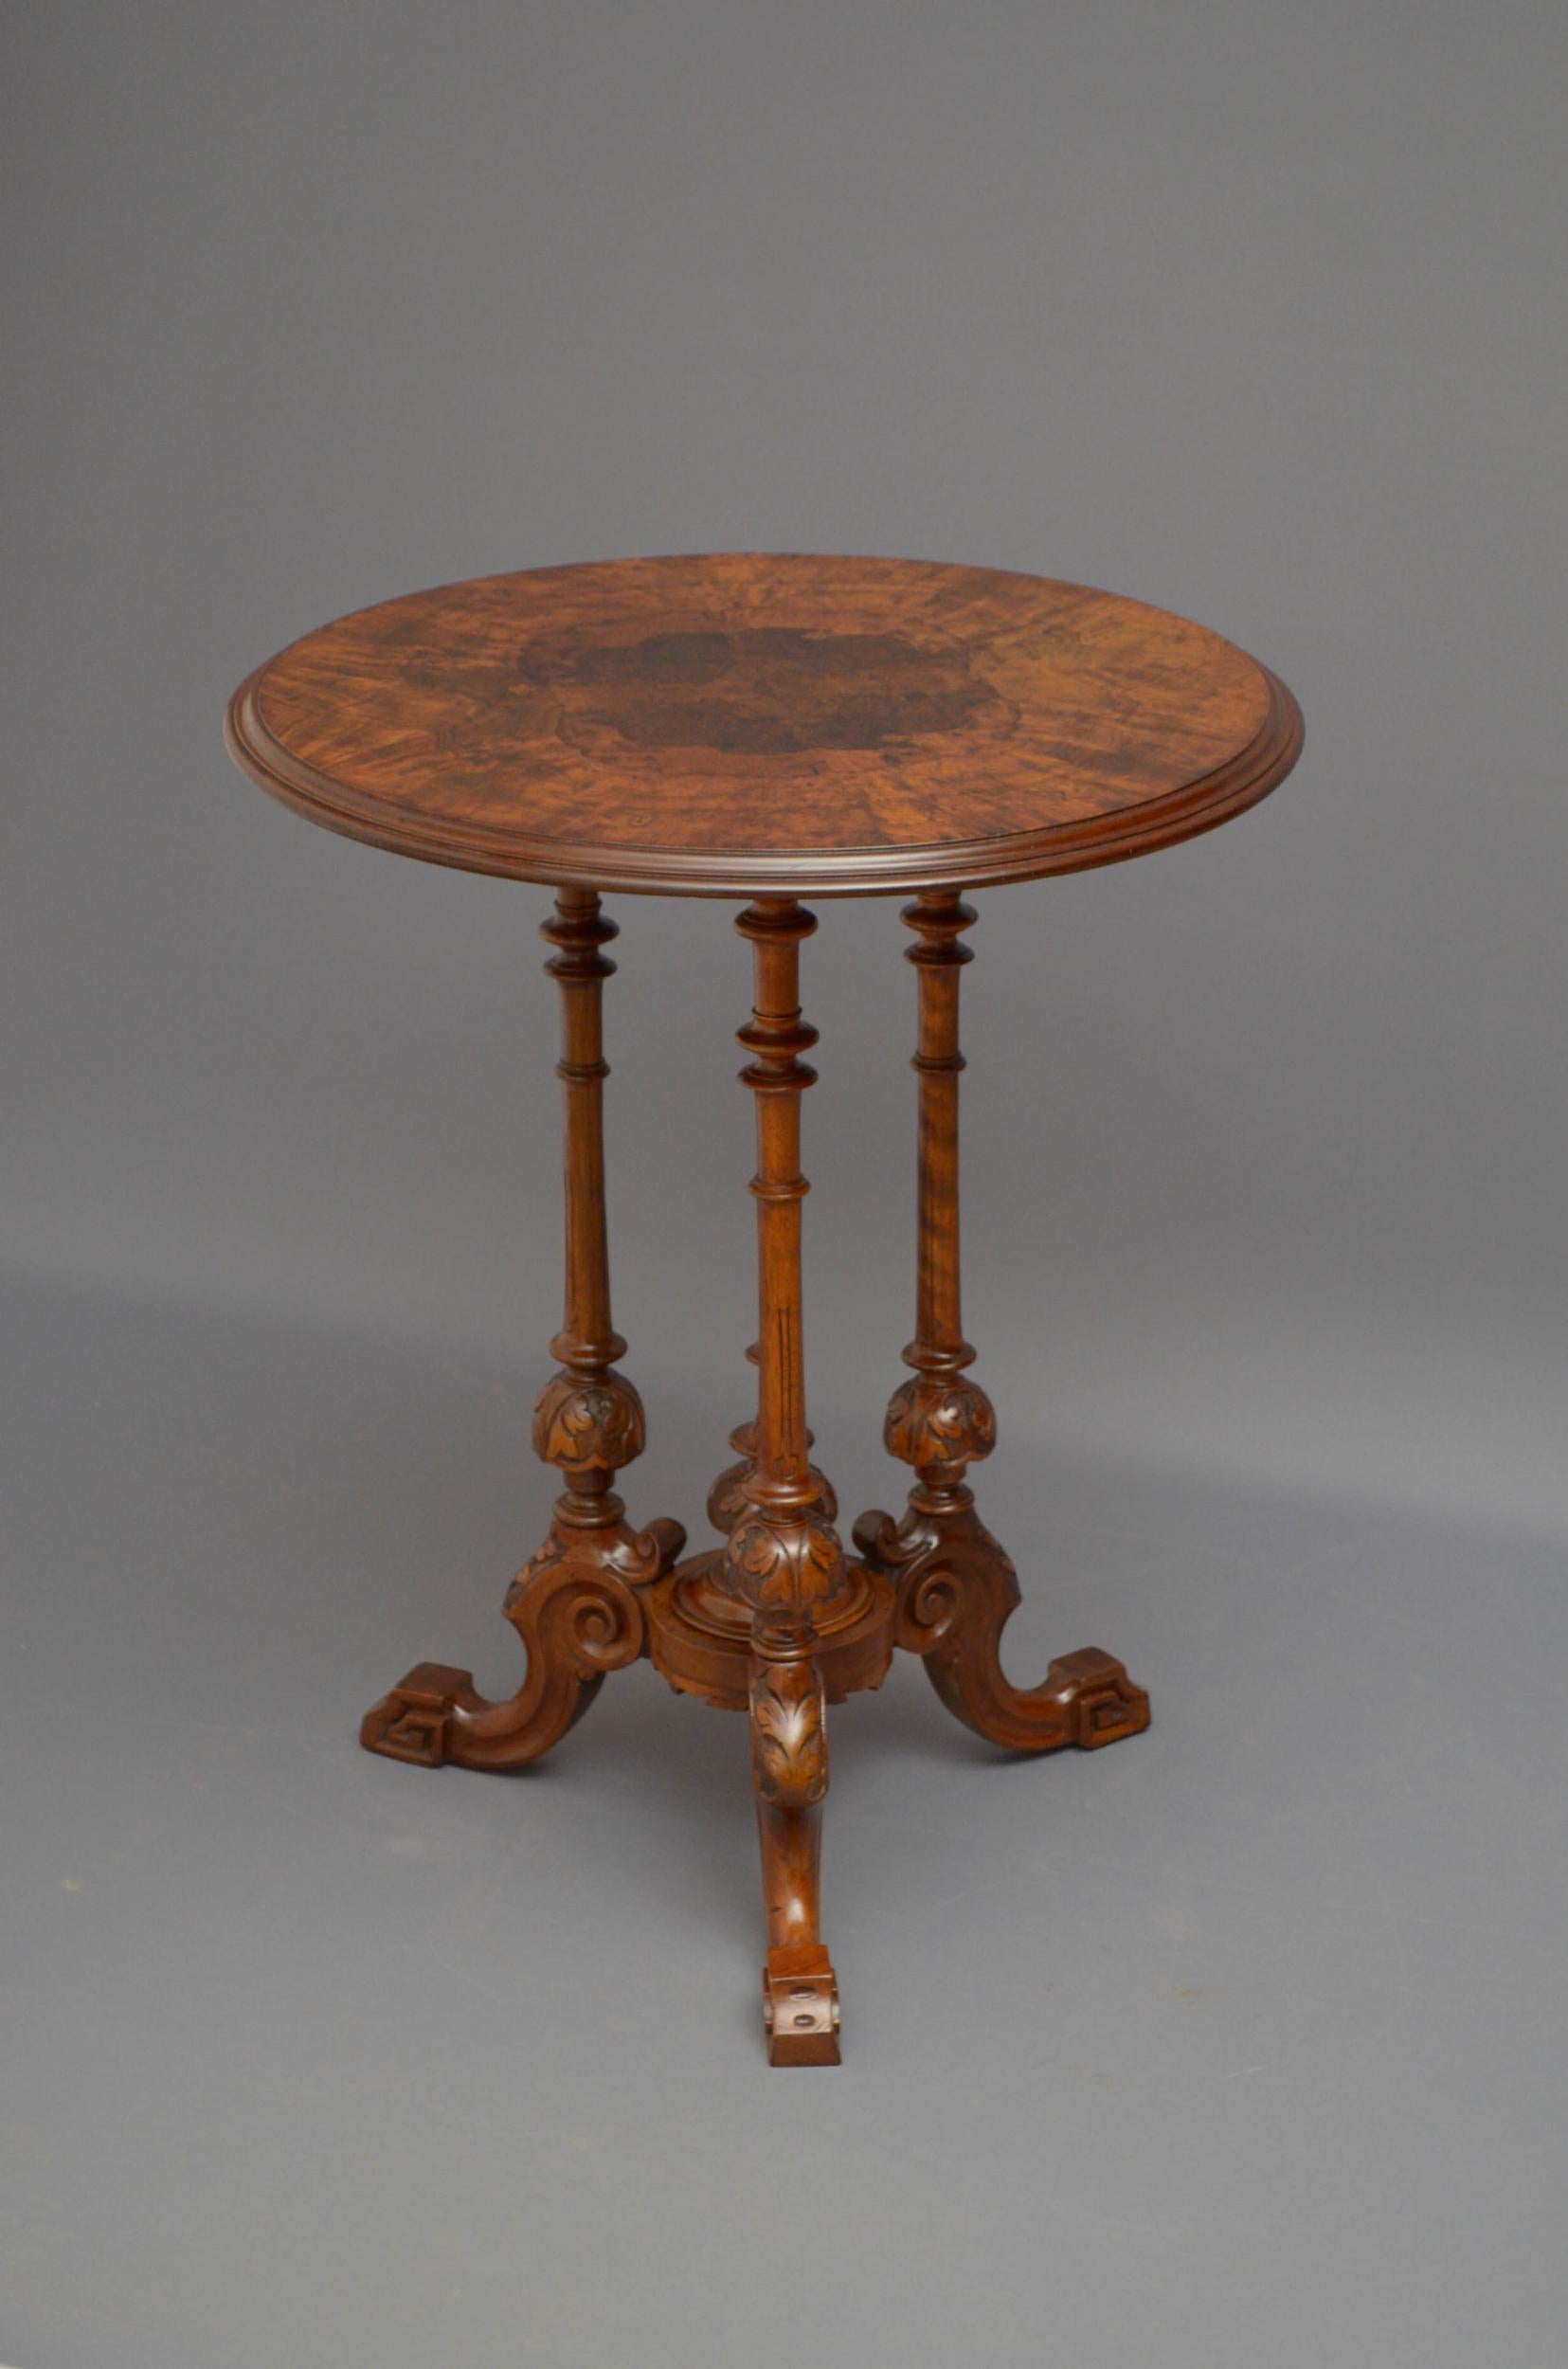 Sn5075 elegant Victorian burr walnut lamp table, having burr and figured walnut top with moulded edge above three turned and carved supports terminating in three carved cabriole legs. This antique table has been syamthetically restored and is in